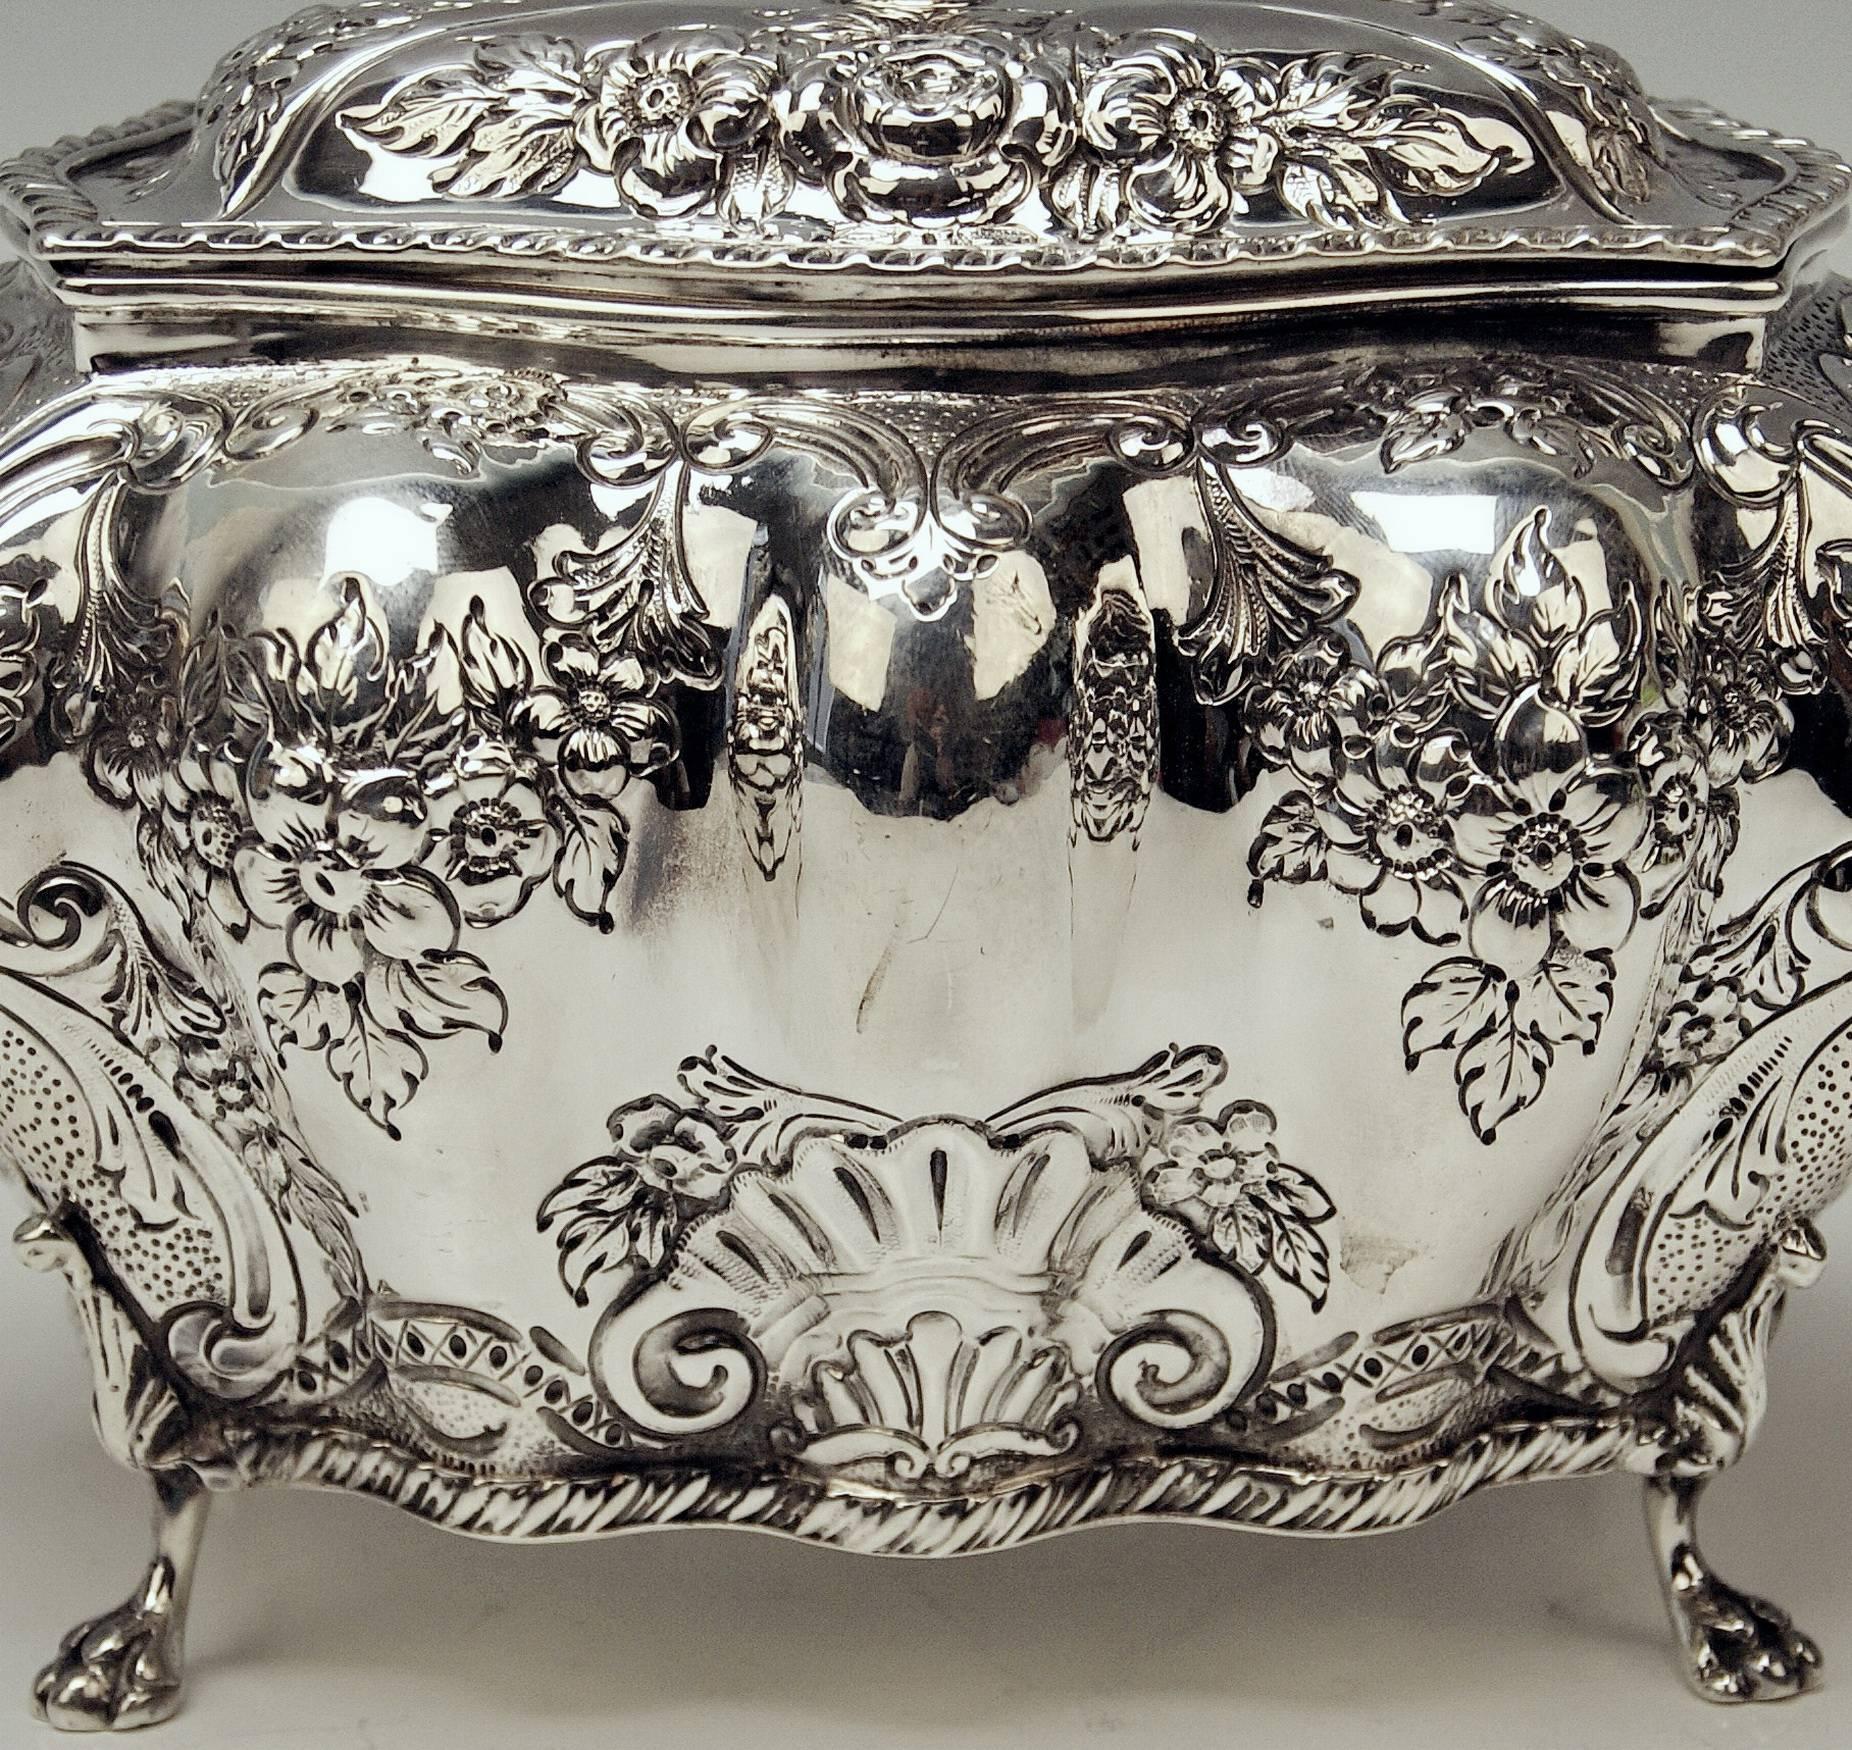 Early 20th Century Sterling Silver Box by G.Nathan & R.Hayes UK Chester, circa 1902-1903